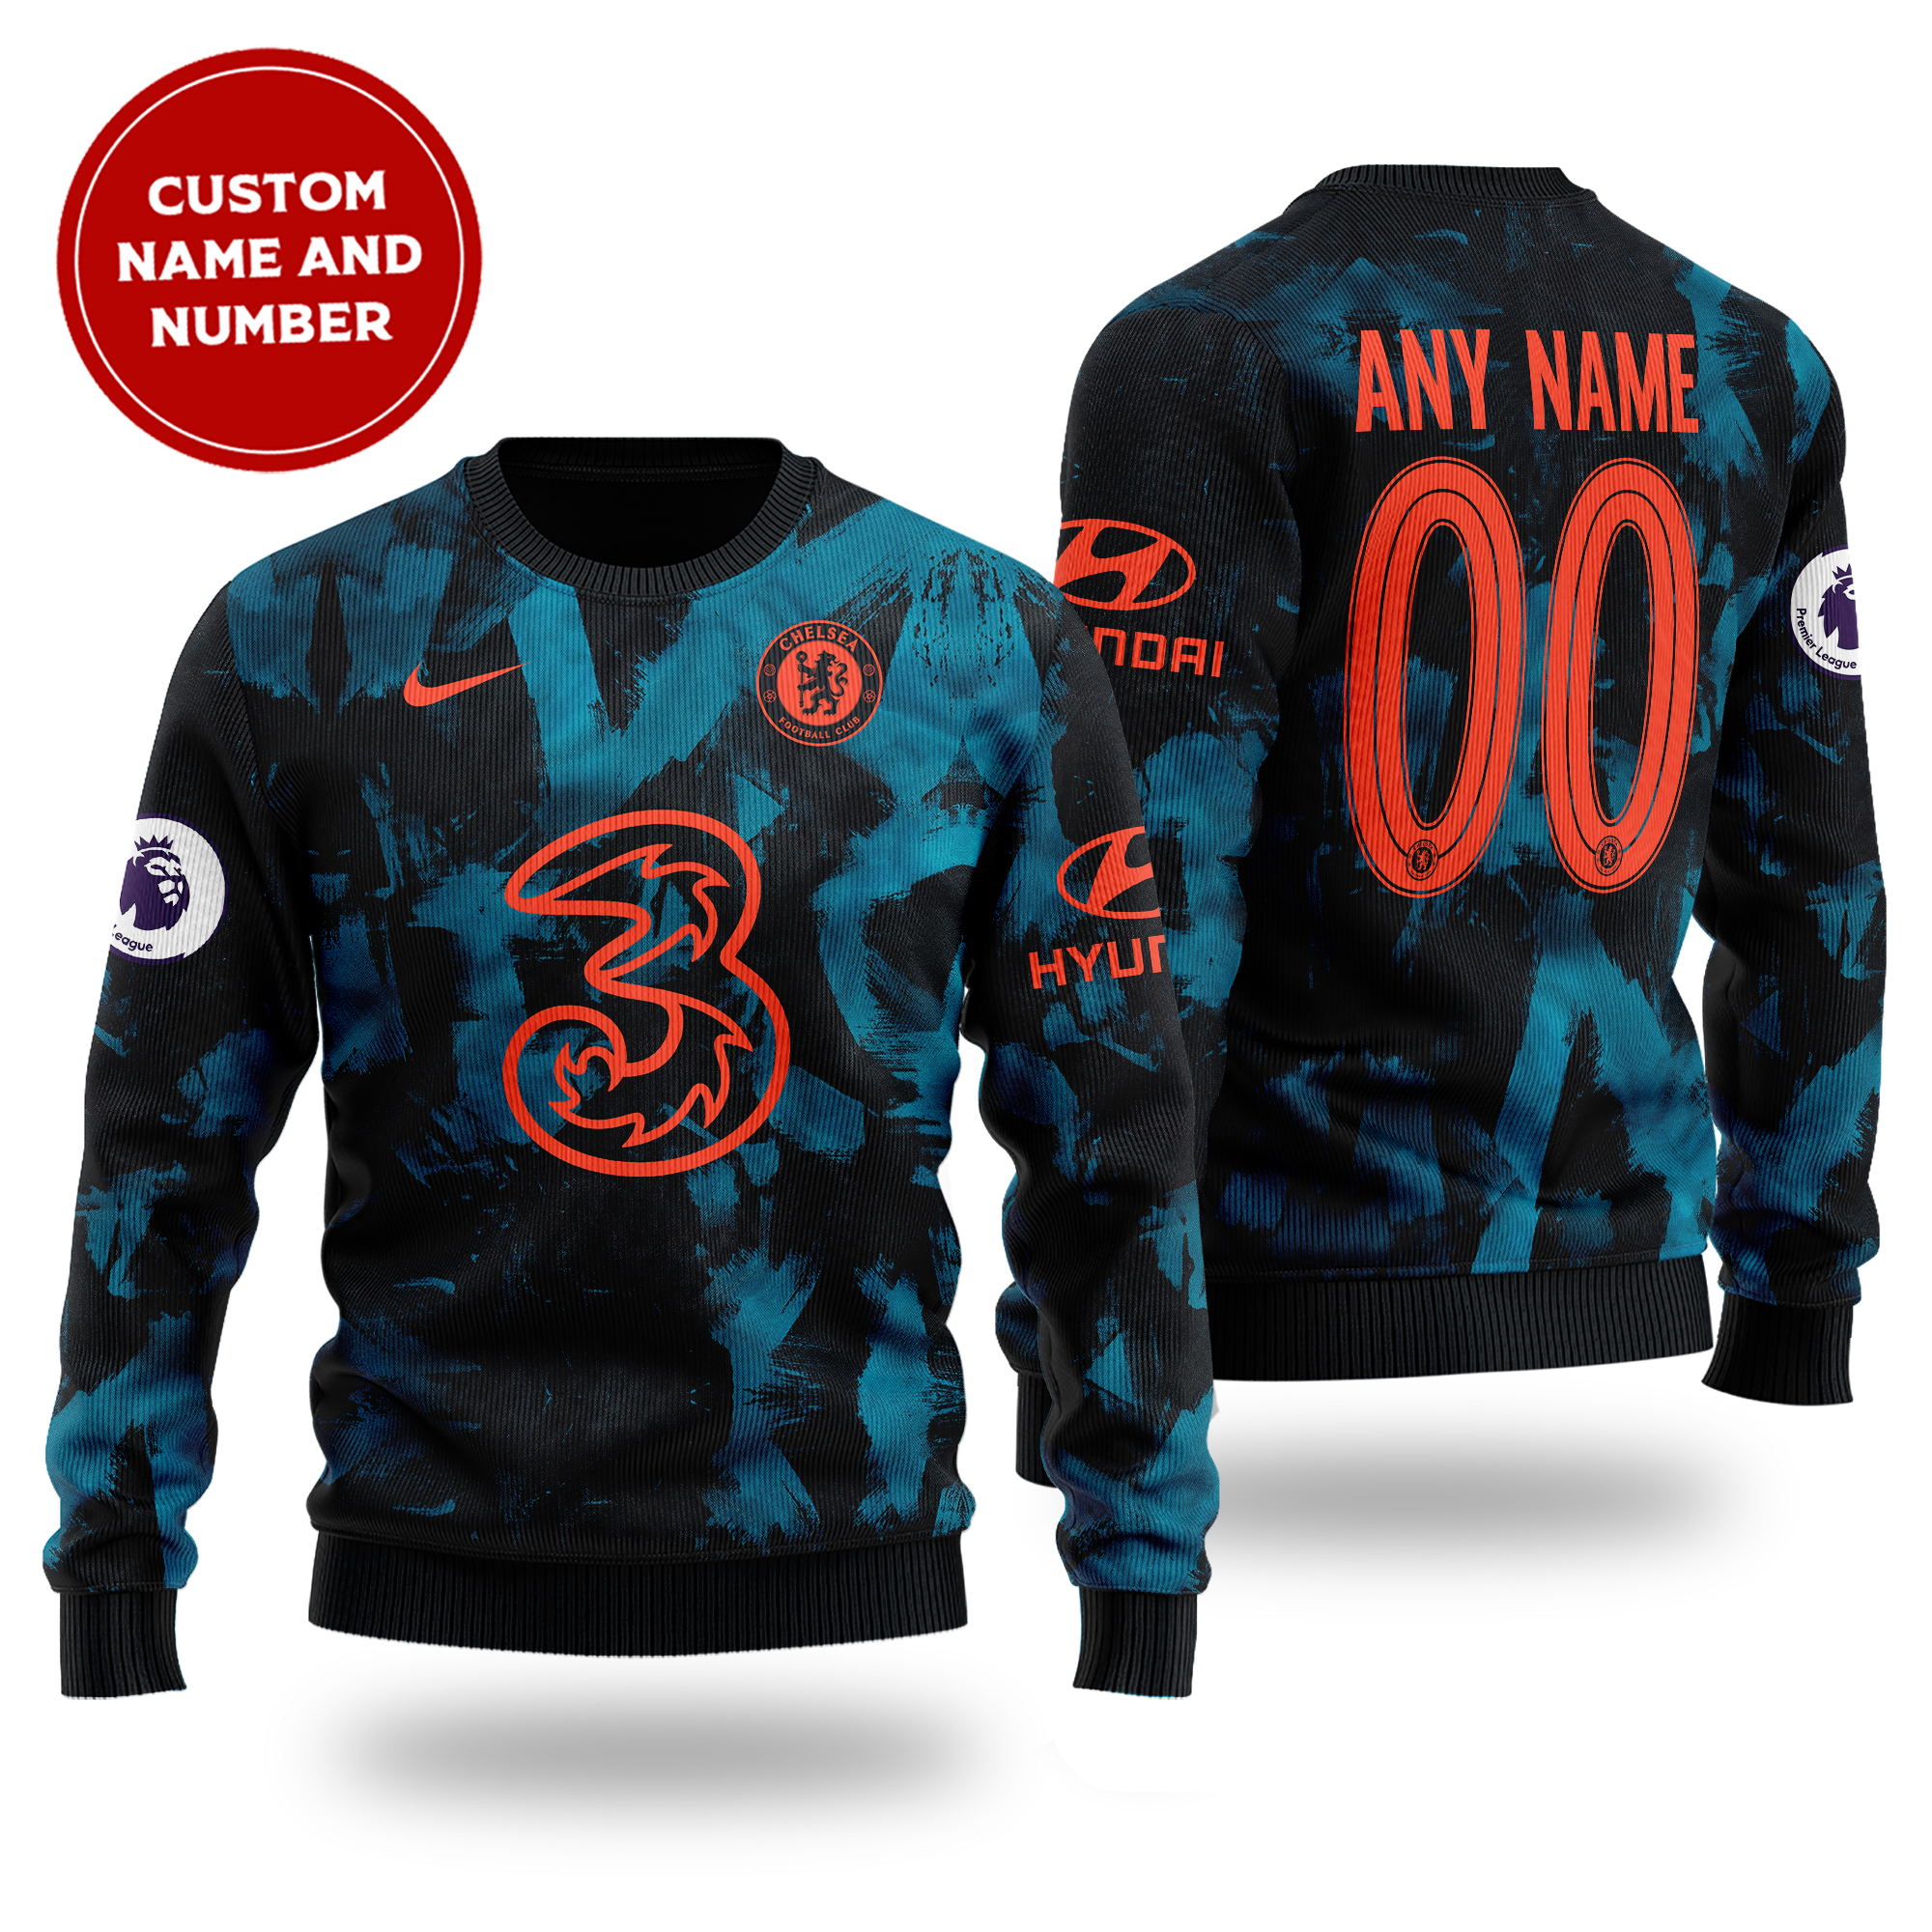 [ Amazing ] Primier League Chelsea FC third kit cutom name and number sweater – Saleoff 261121